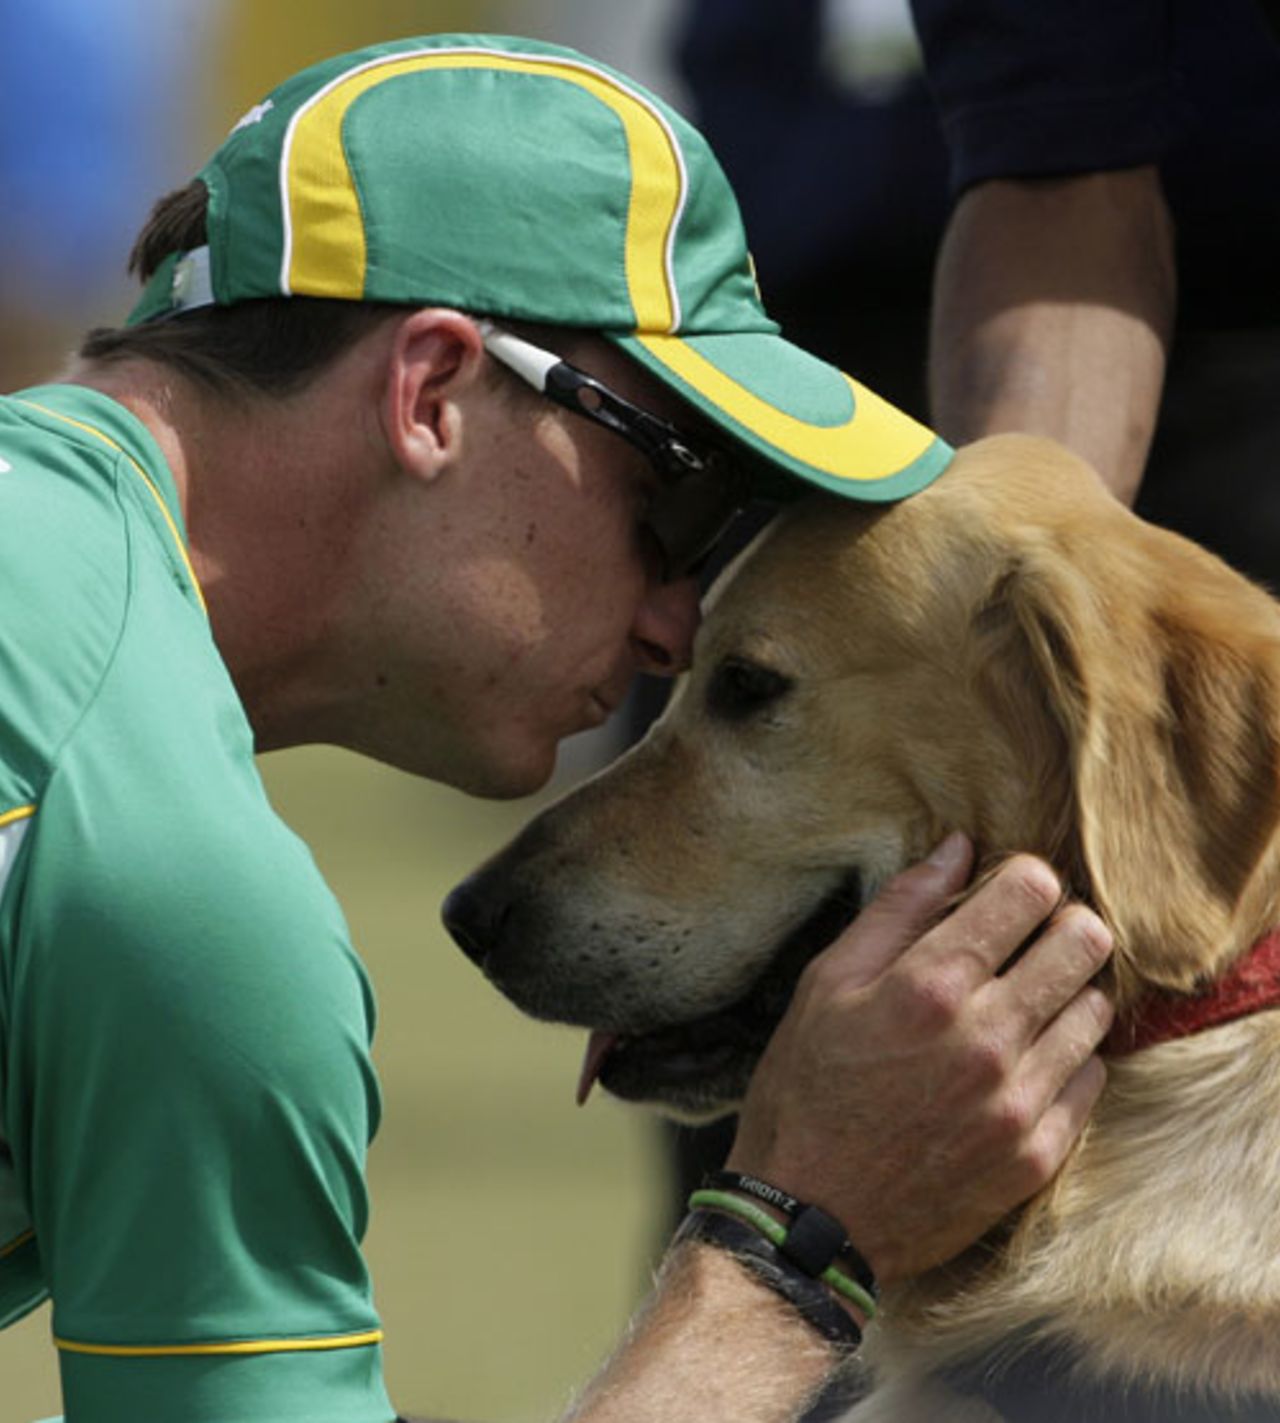 Dale Steyn pets one of the security sniffer dogs before the game, India v South Africa, 1st ODI, Jaipur, February 21, 2010